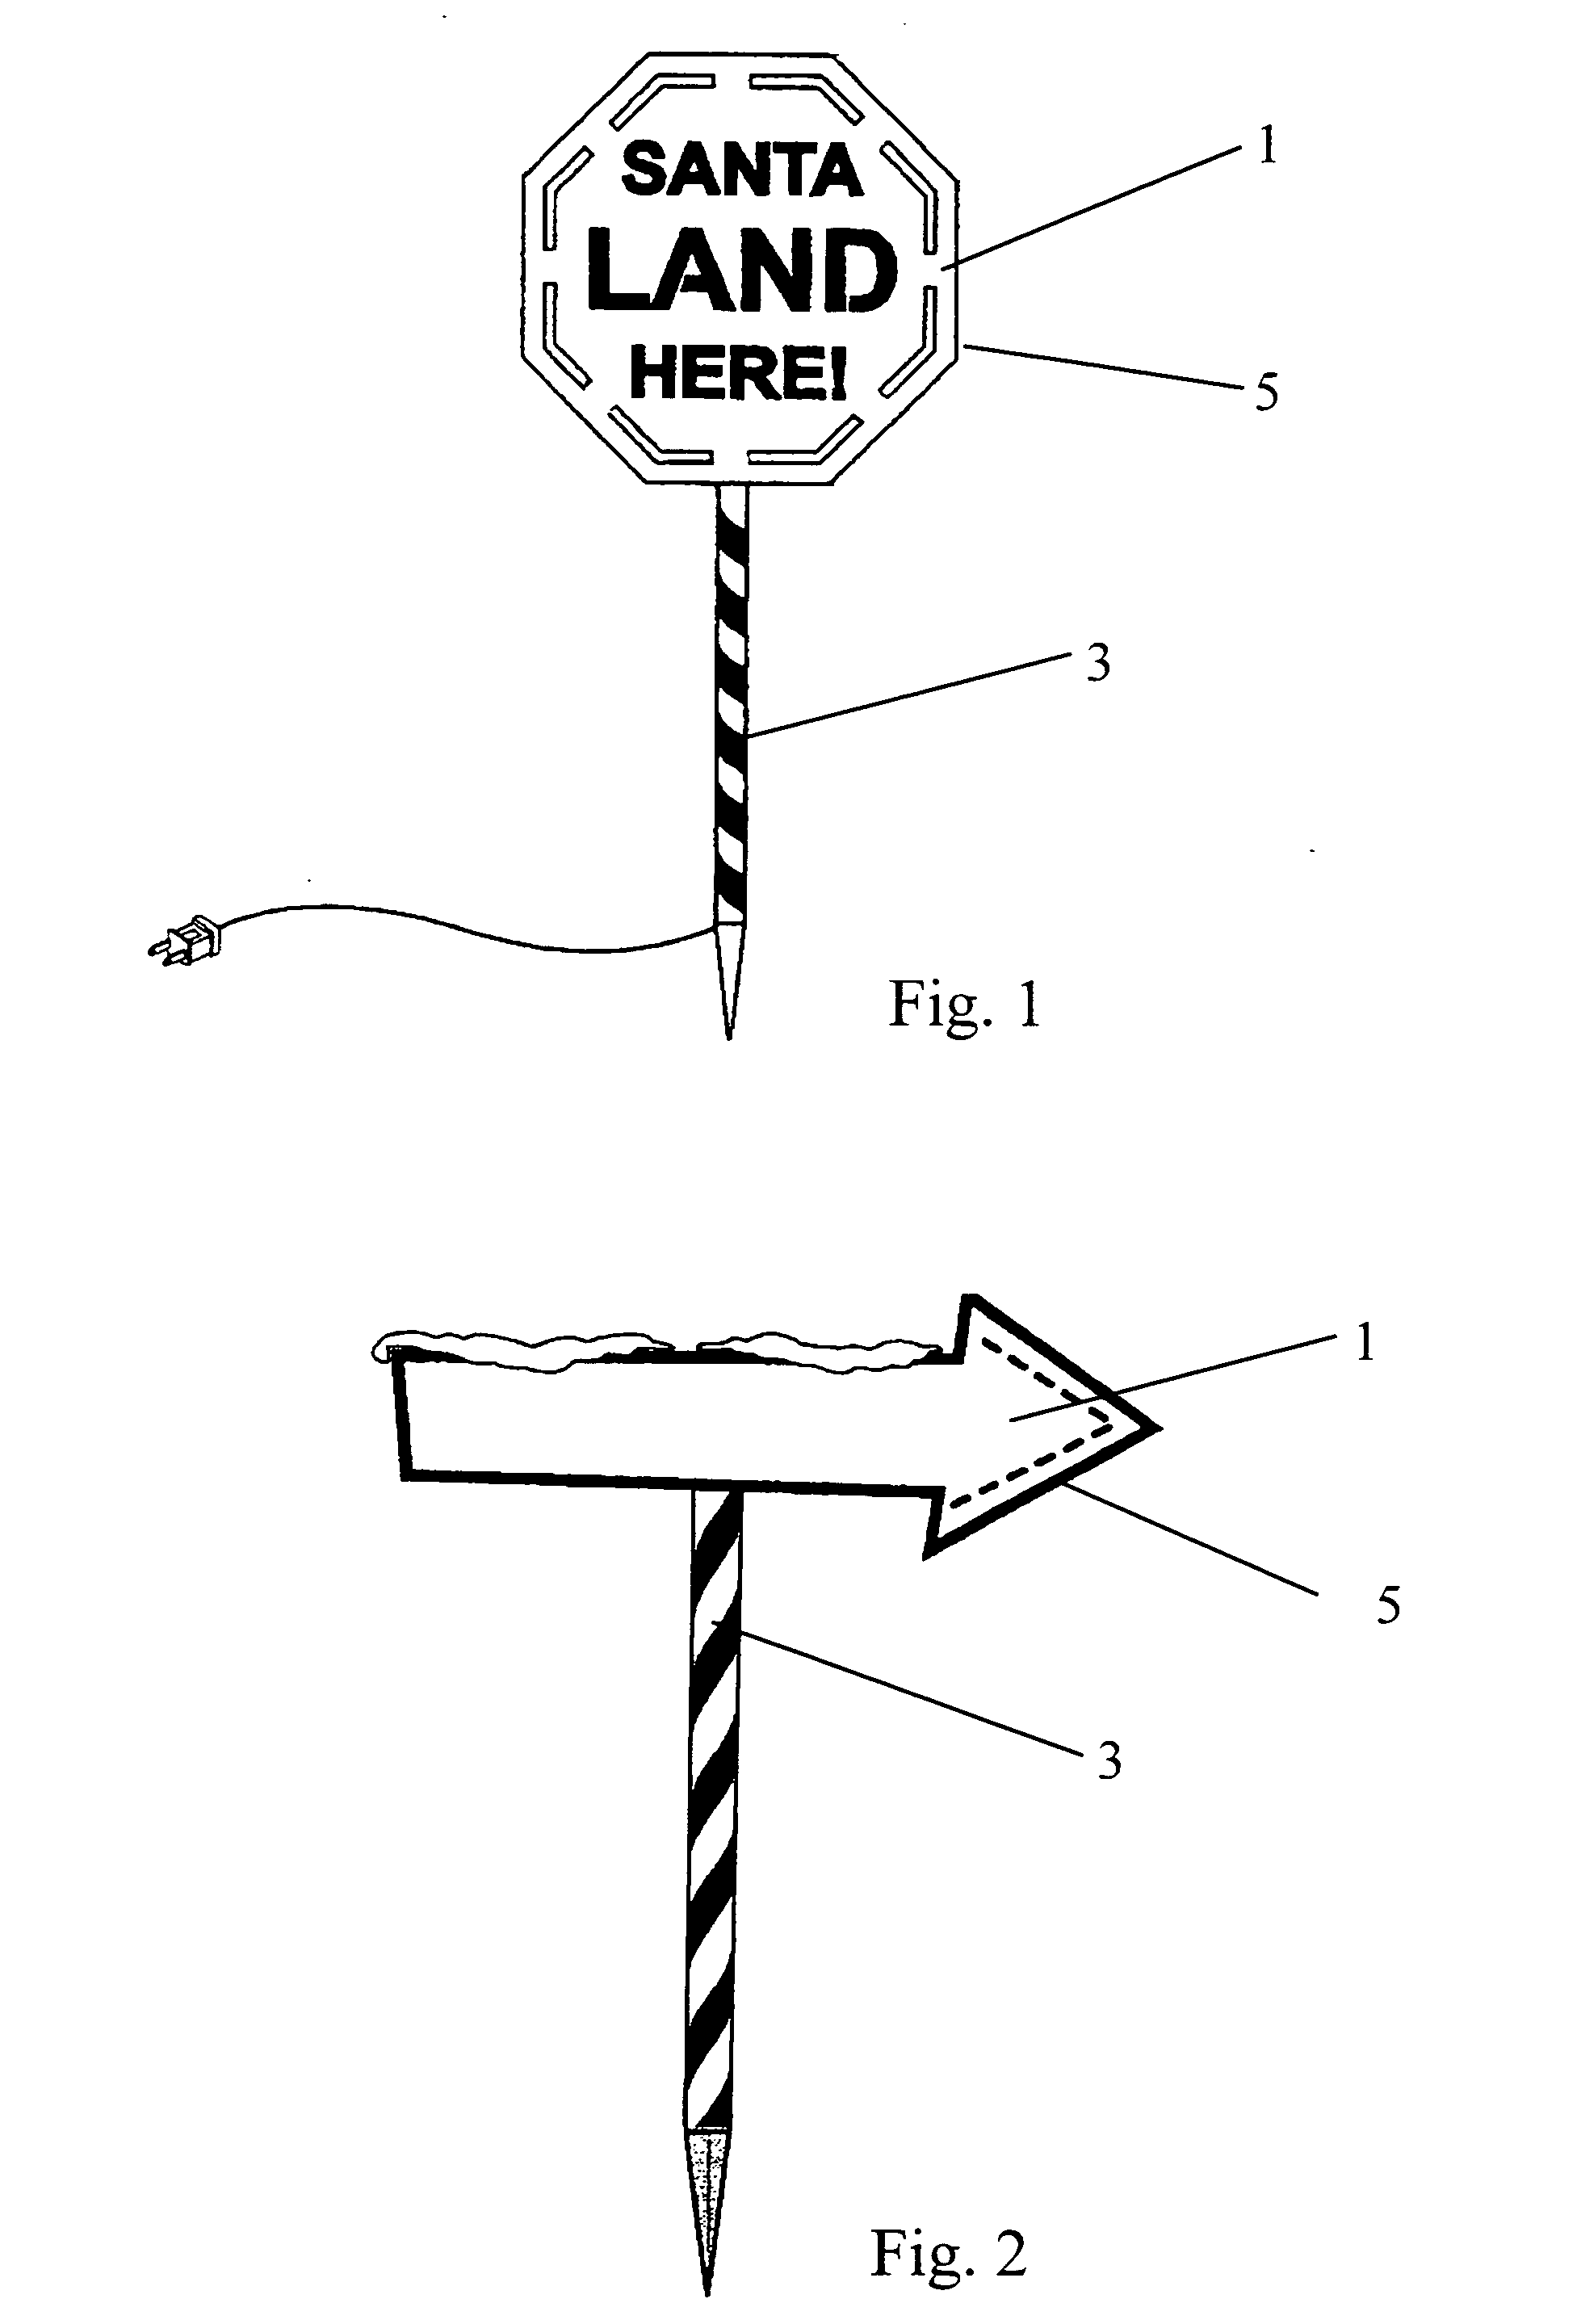 Ground supported lighting device for displaying information